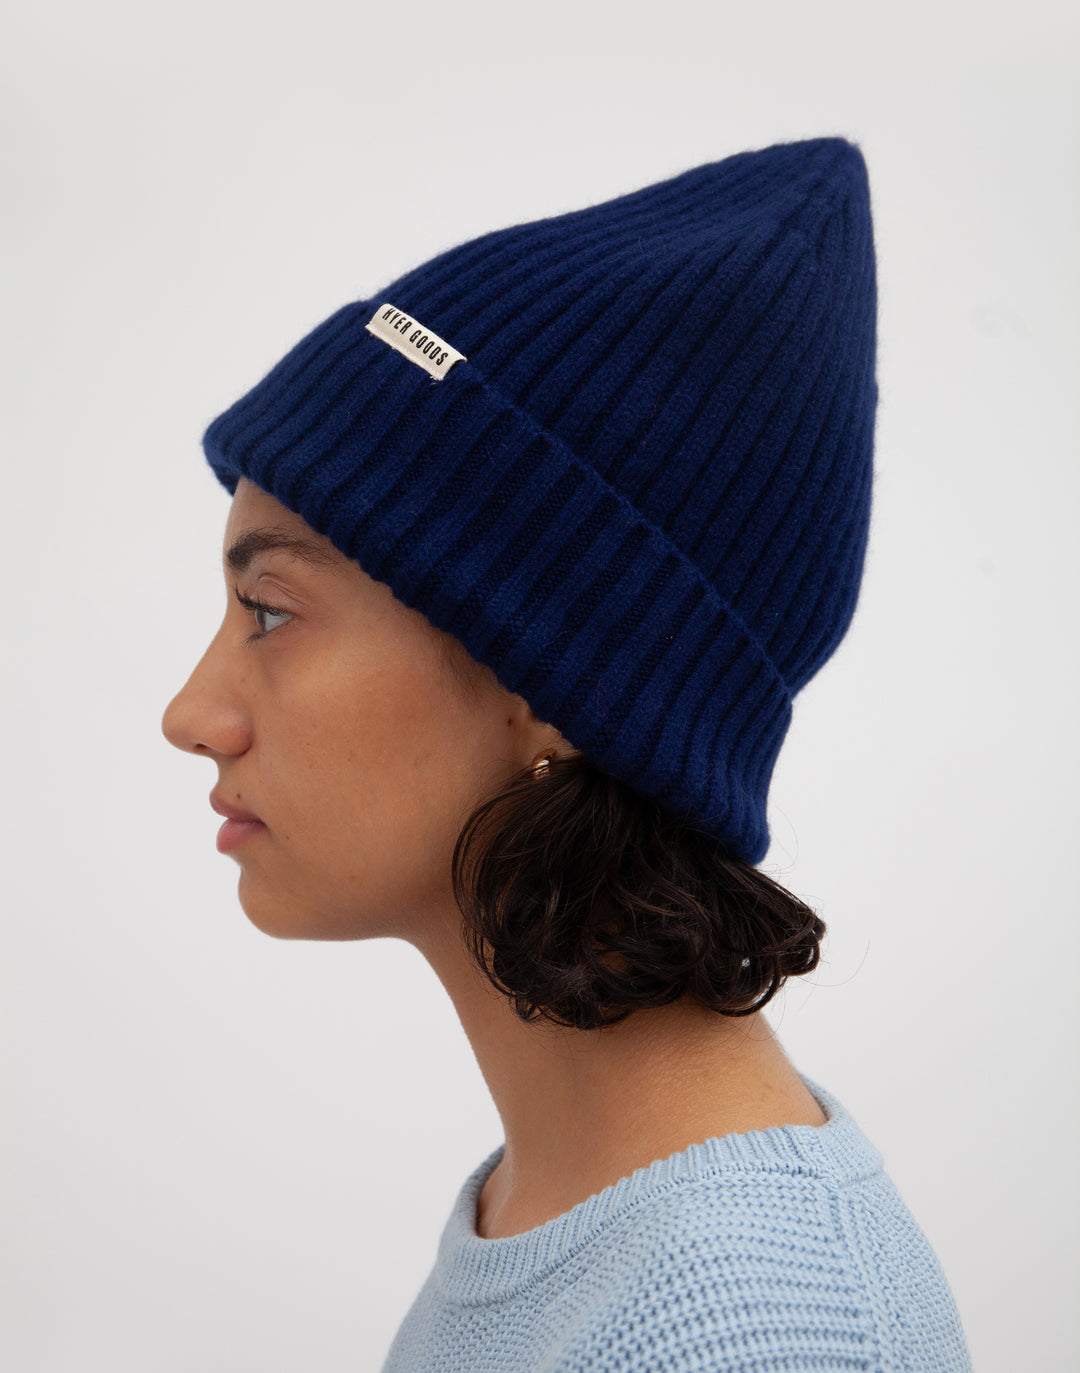 Hyer Goods_A Better Beanie_Cashmere_navy_#color_navy